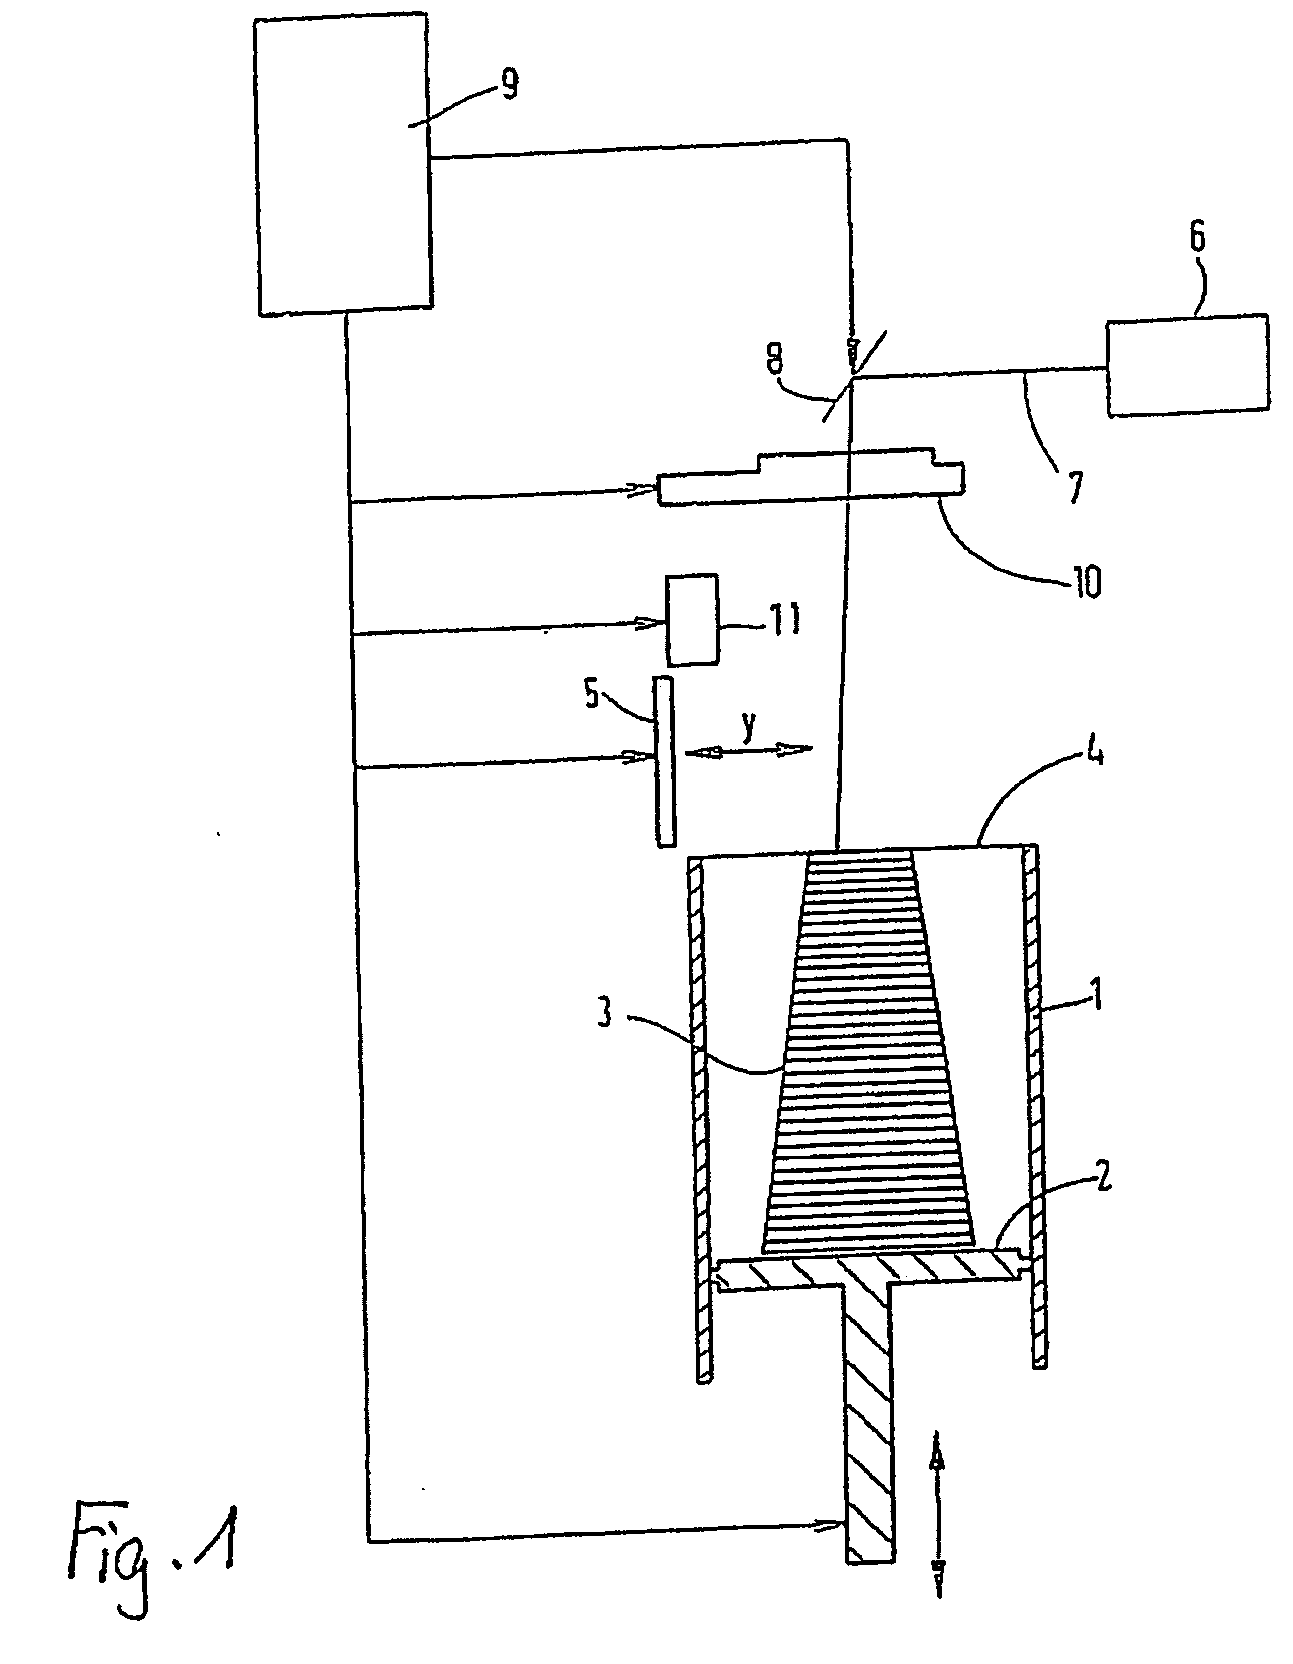 Metal powder for use in an additive method for the production of three-dimensional objects and method using such metal powder